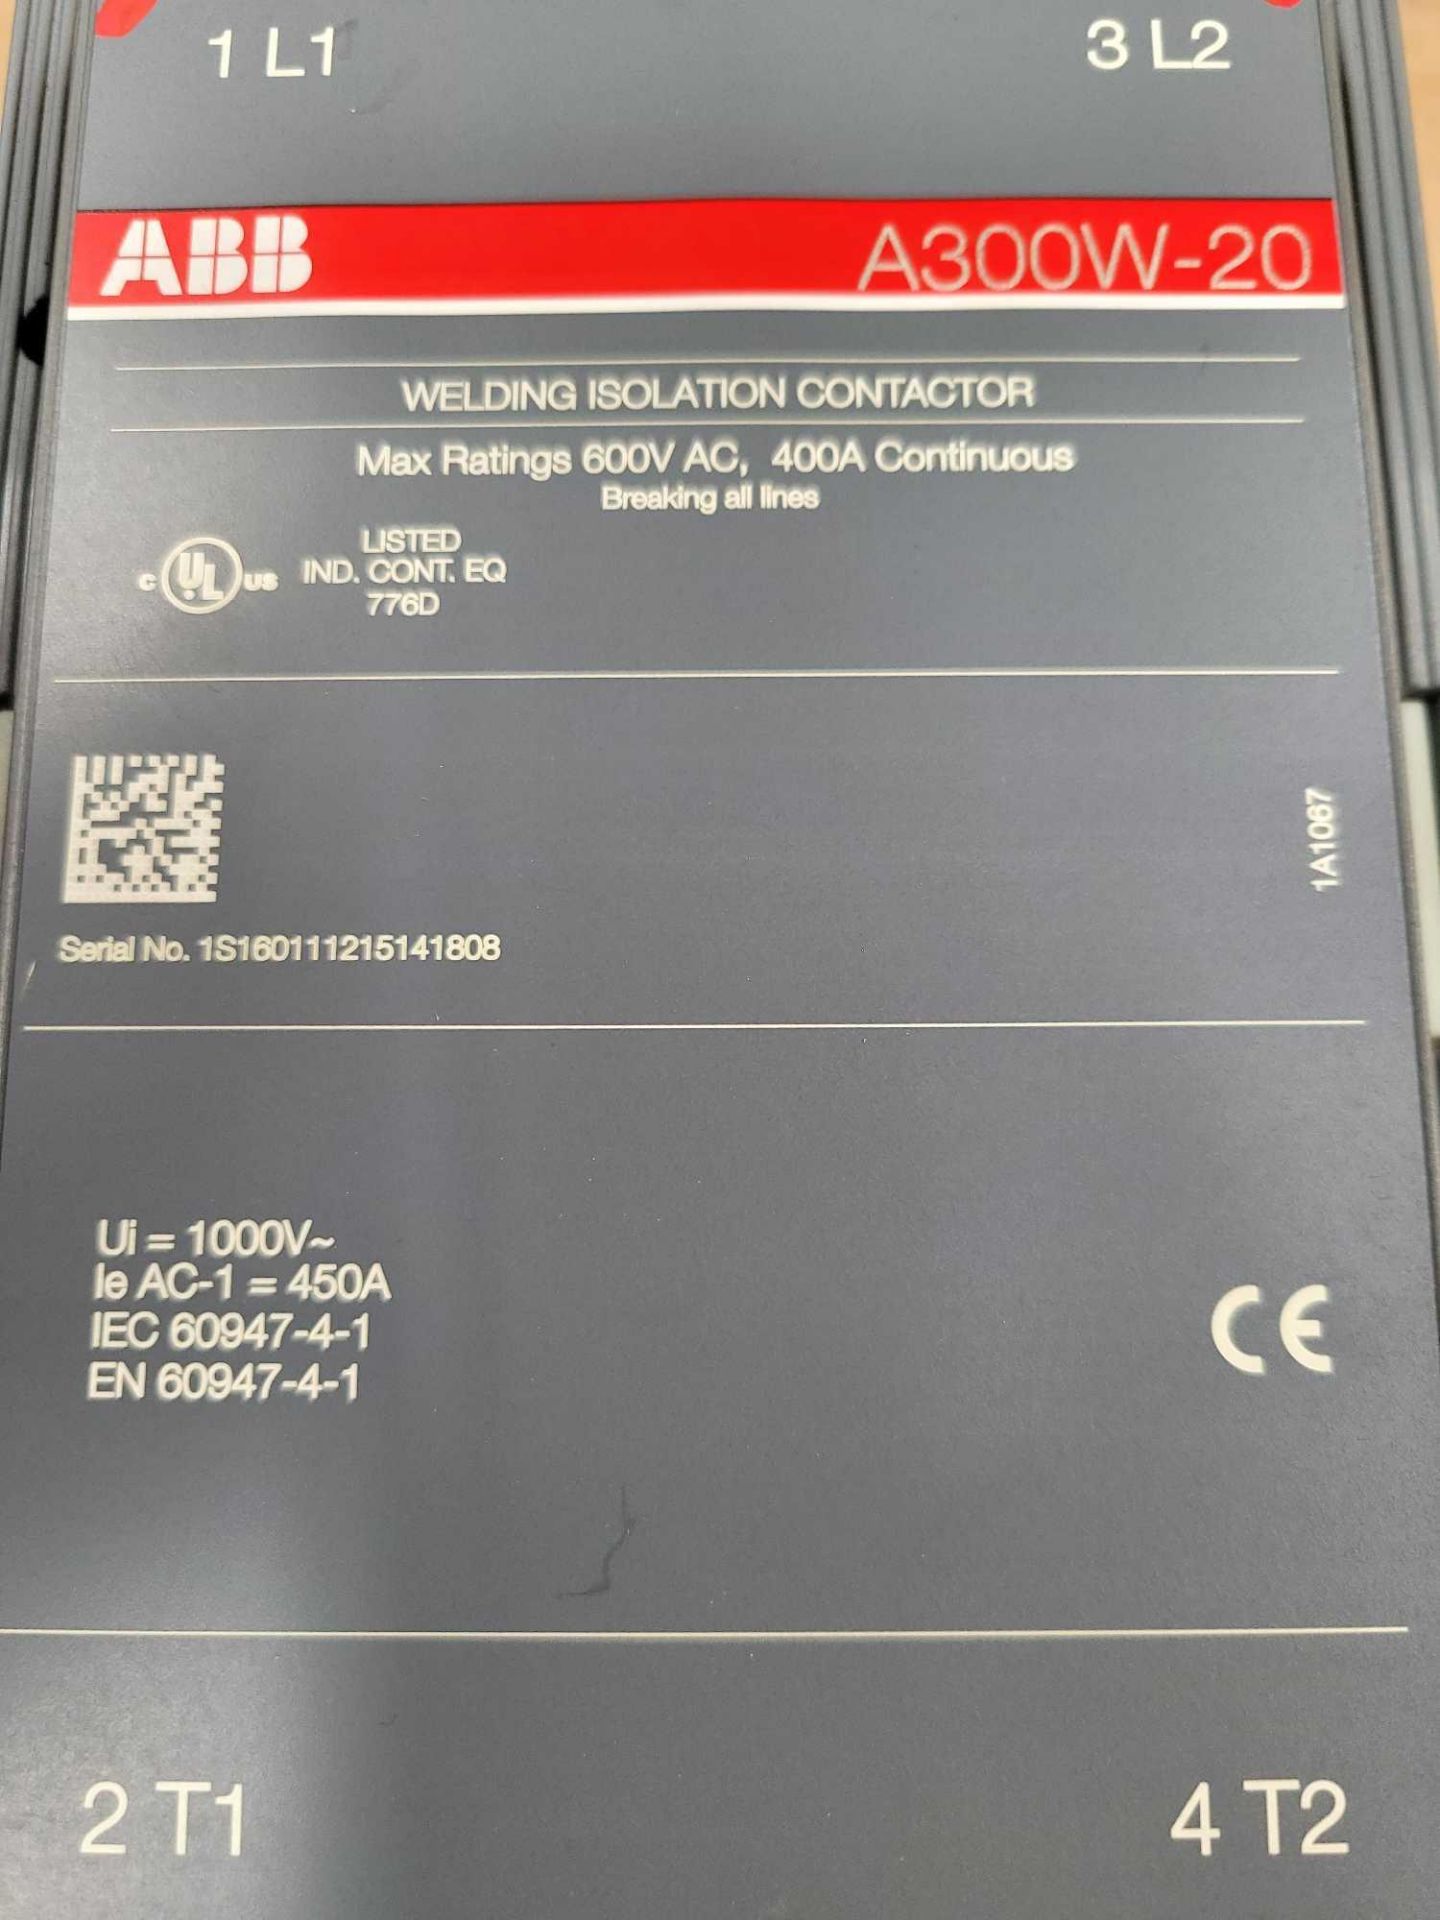 ABB A300W-20 / Welding Isolation Contactor  /  Lot Weight: 13.6 lbs - Image 2 of 7